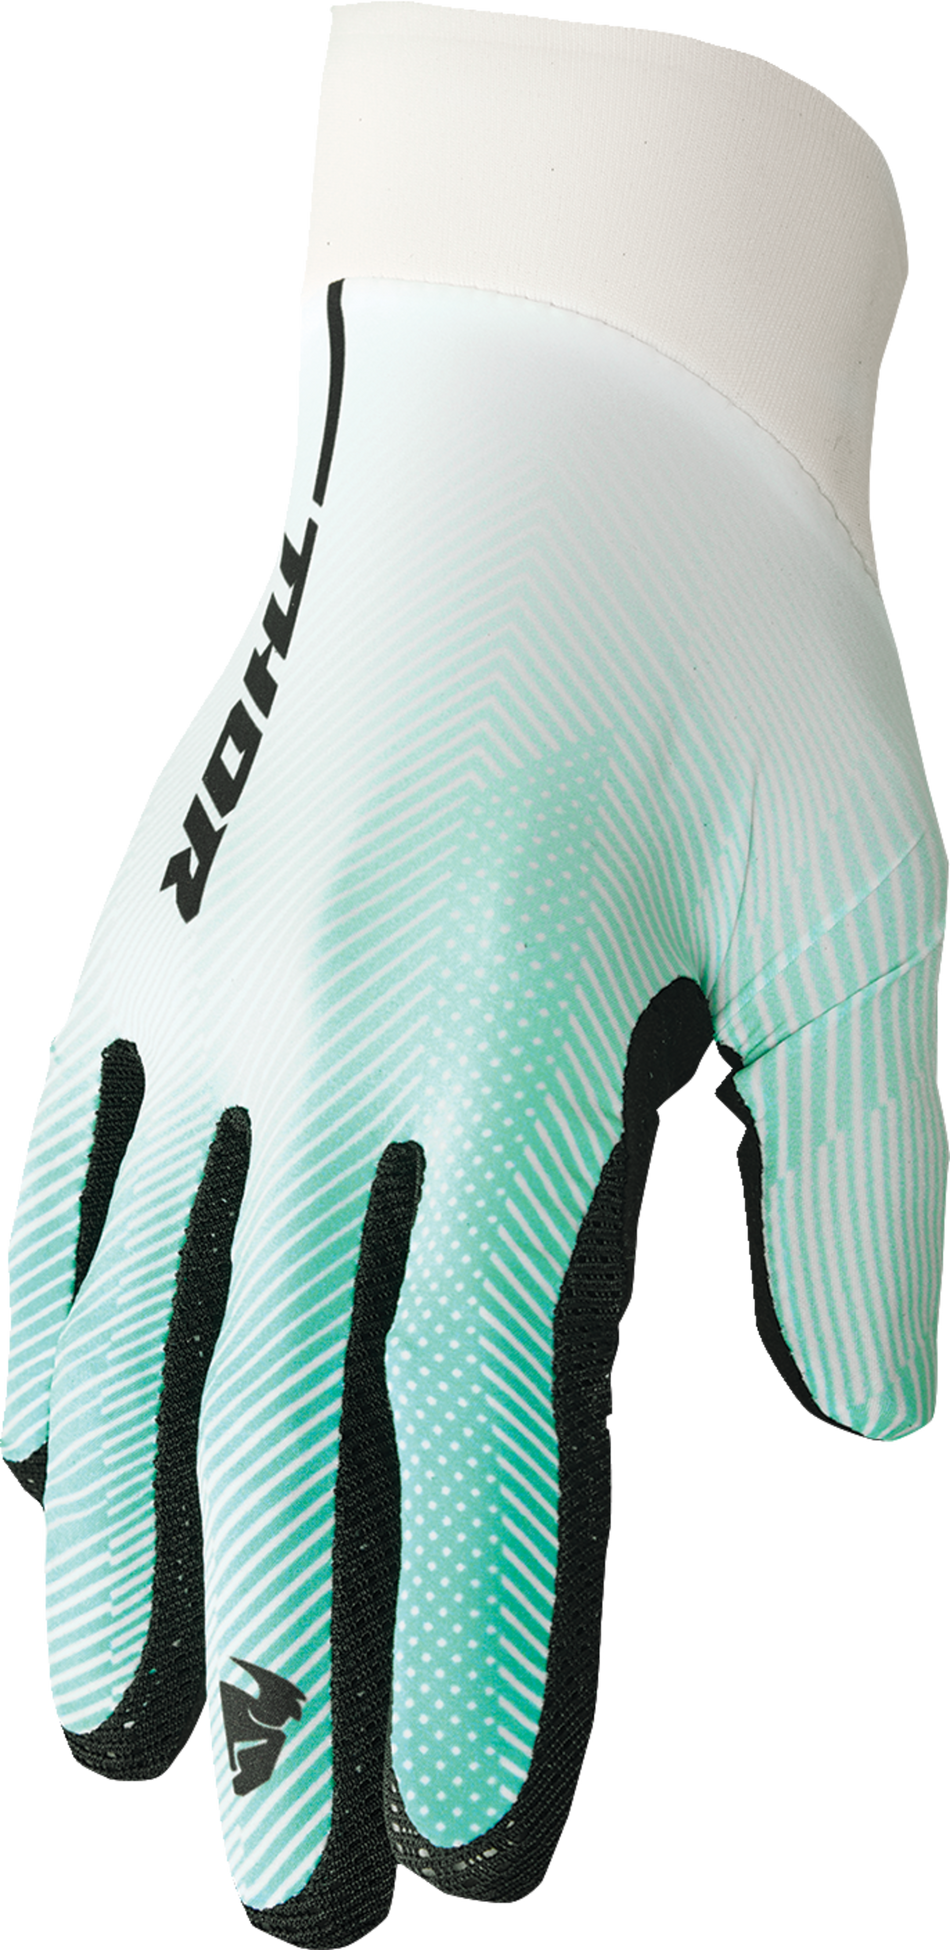 THOR Agile Tech Gloves - White/Teal - Large 3330-7210